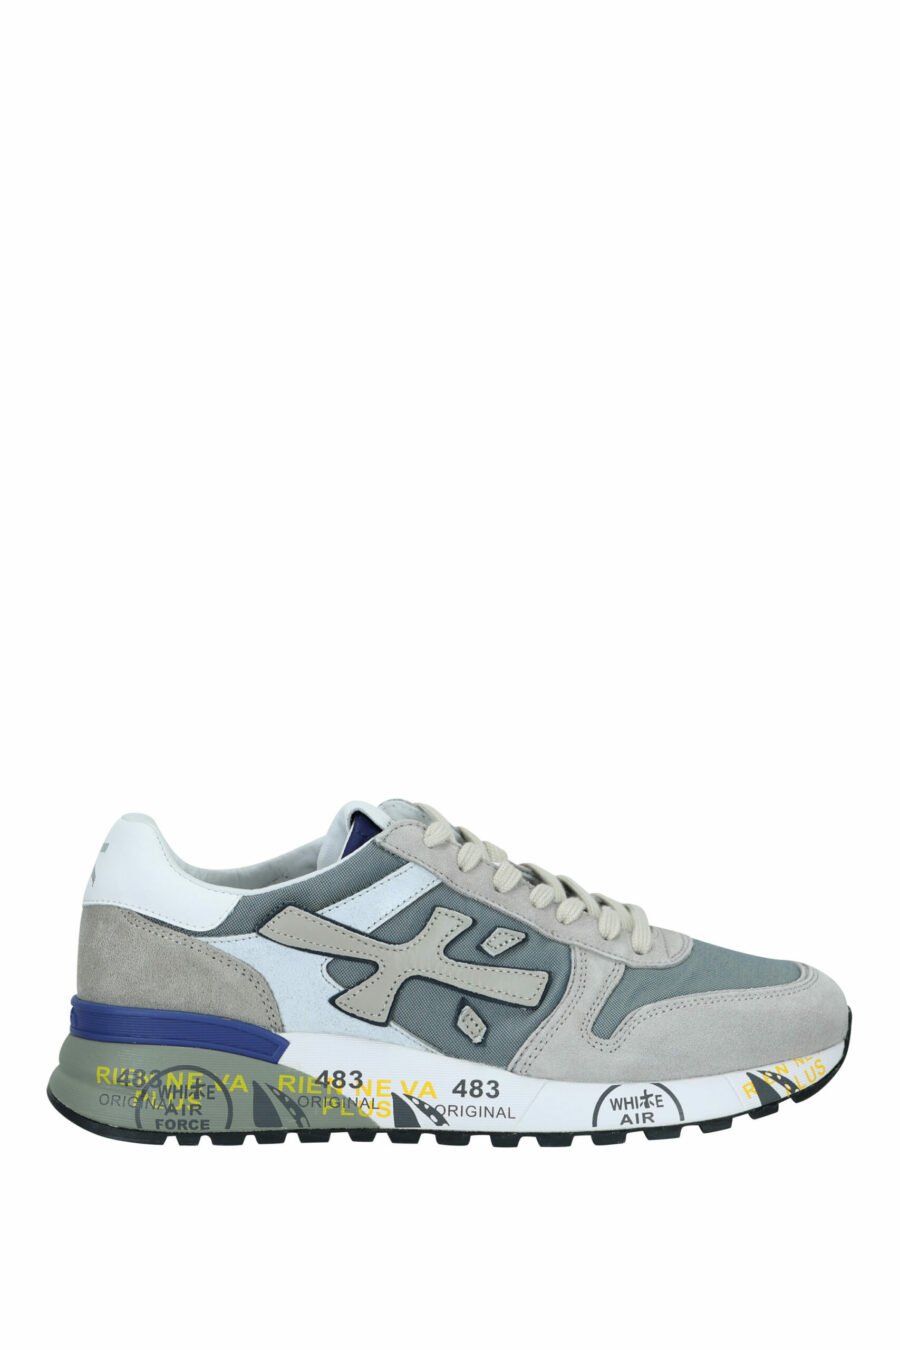 Grey mix trainers with blue detail "Mick 6611" - 8053680270999 scaled